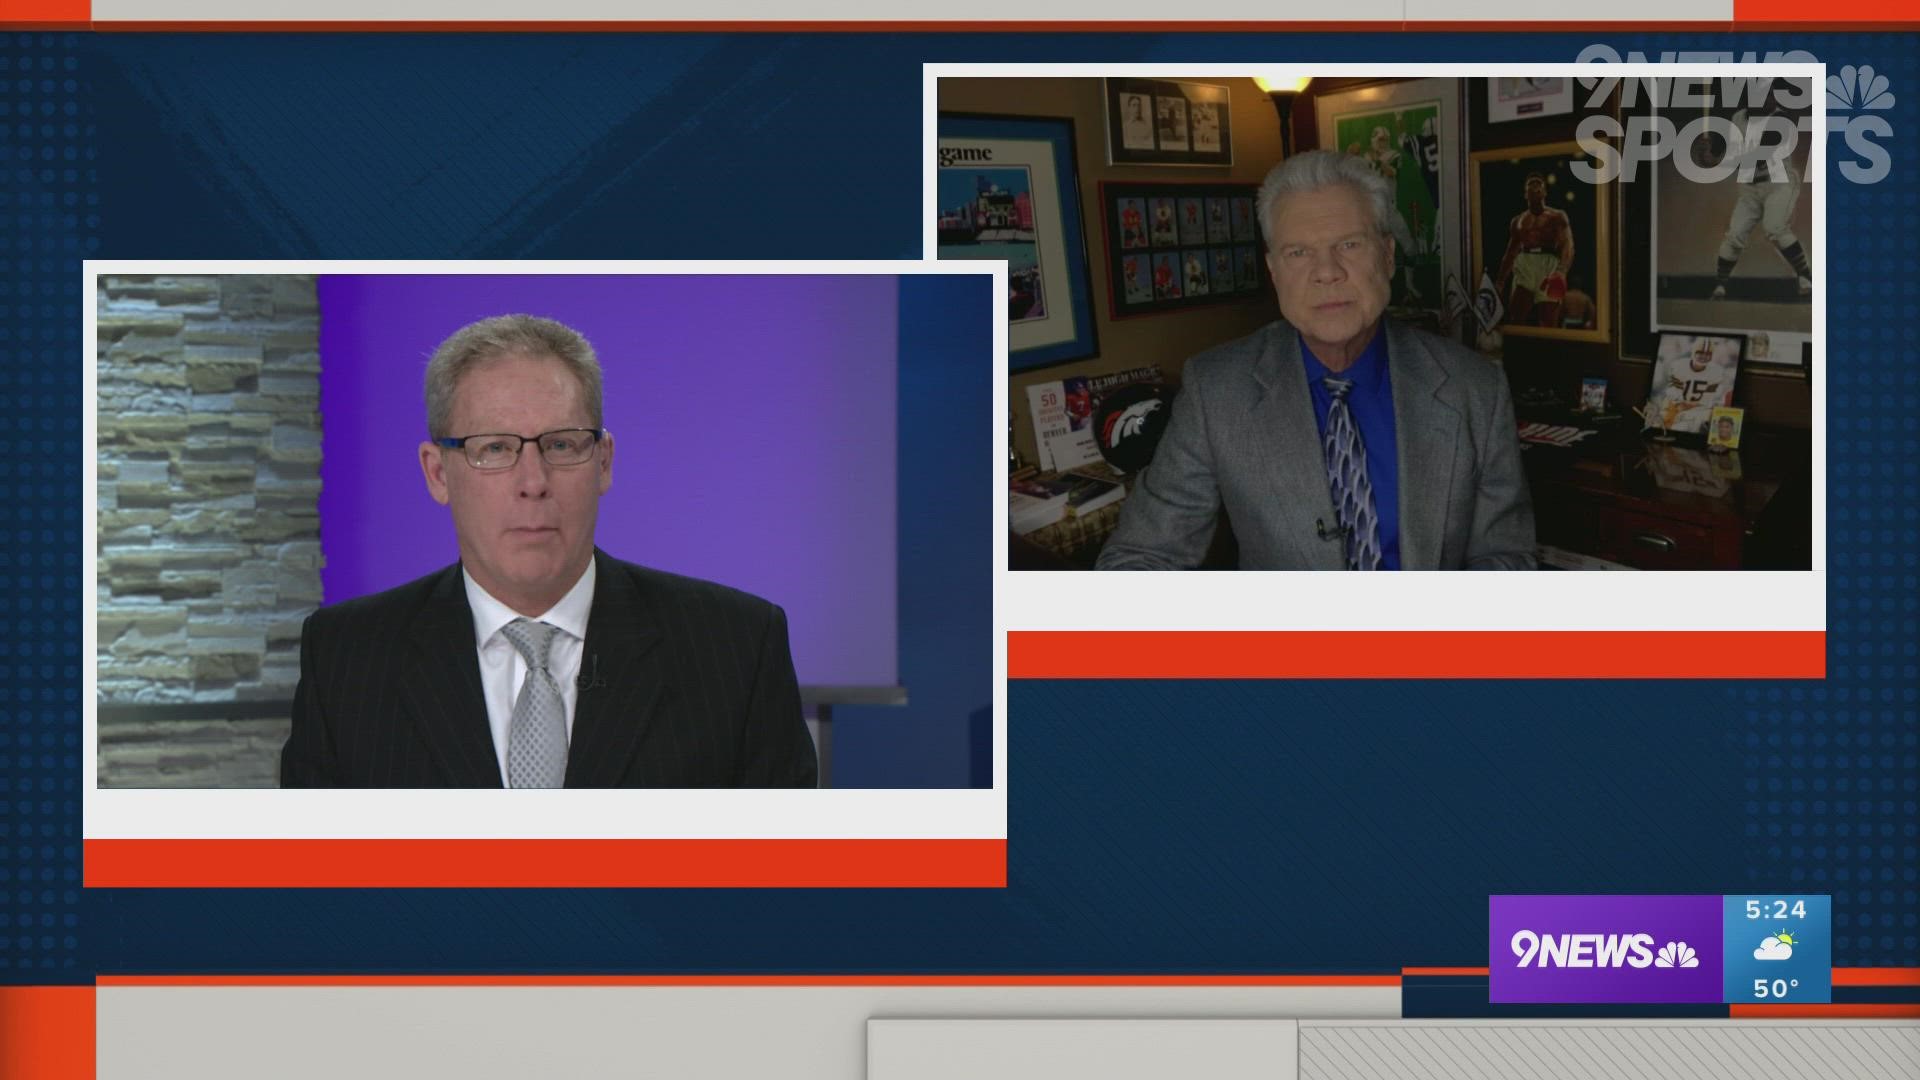 Mike Klis joined Rod Mackey live on 9NEWS to discuss the latest on the Denver Broncos and the new coaching staff.